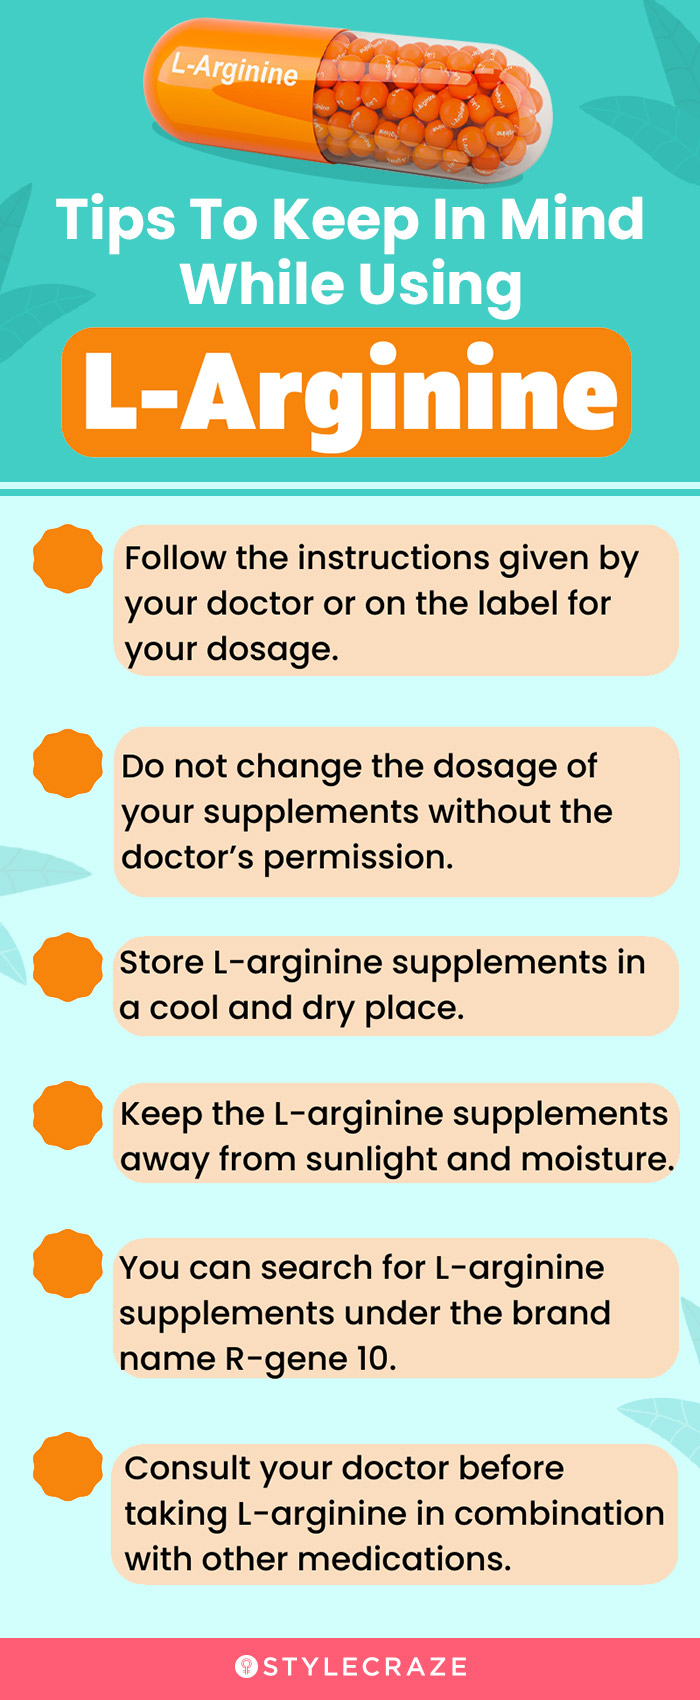 tips to keep in mind while using l-arginine (infographic)